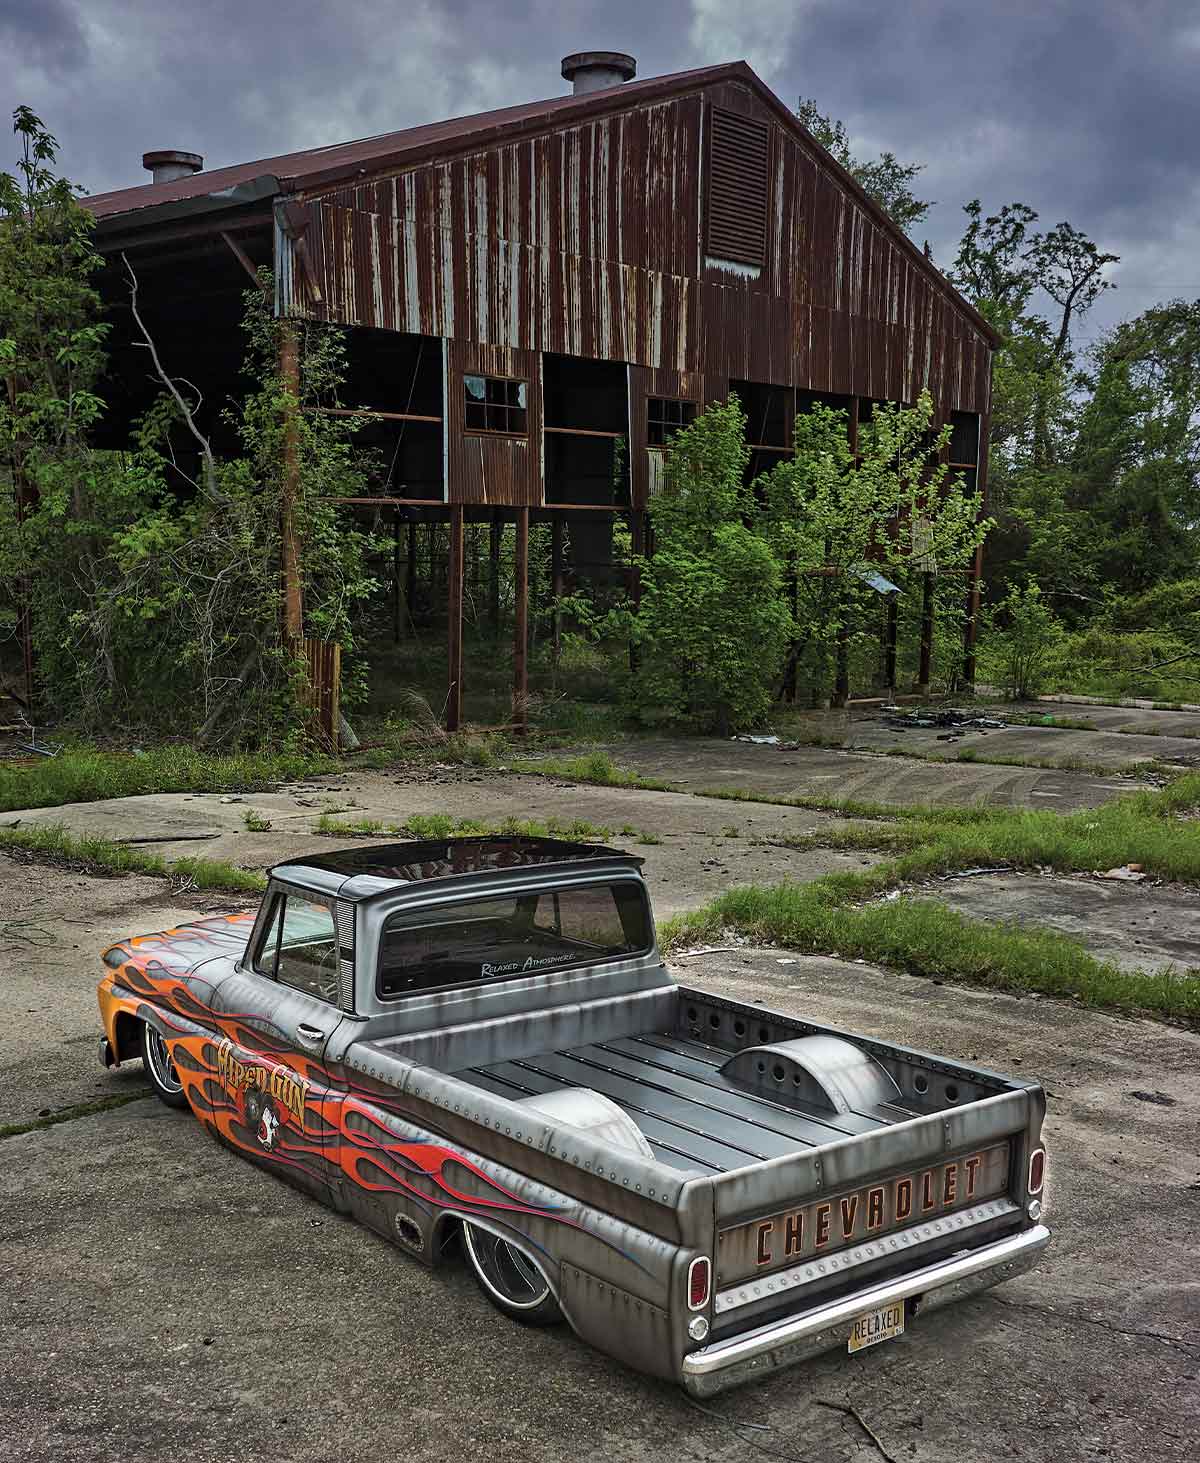 '66 Chevy C10 3/4 rear view in front of abandoned building